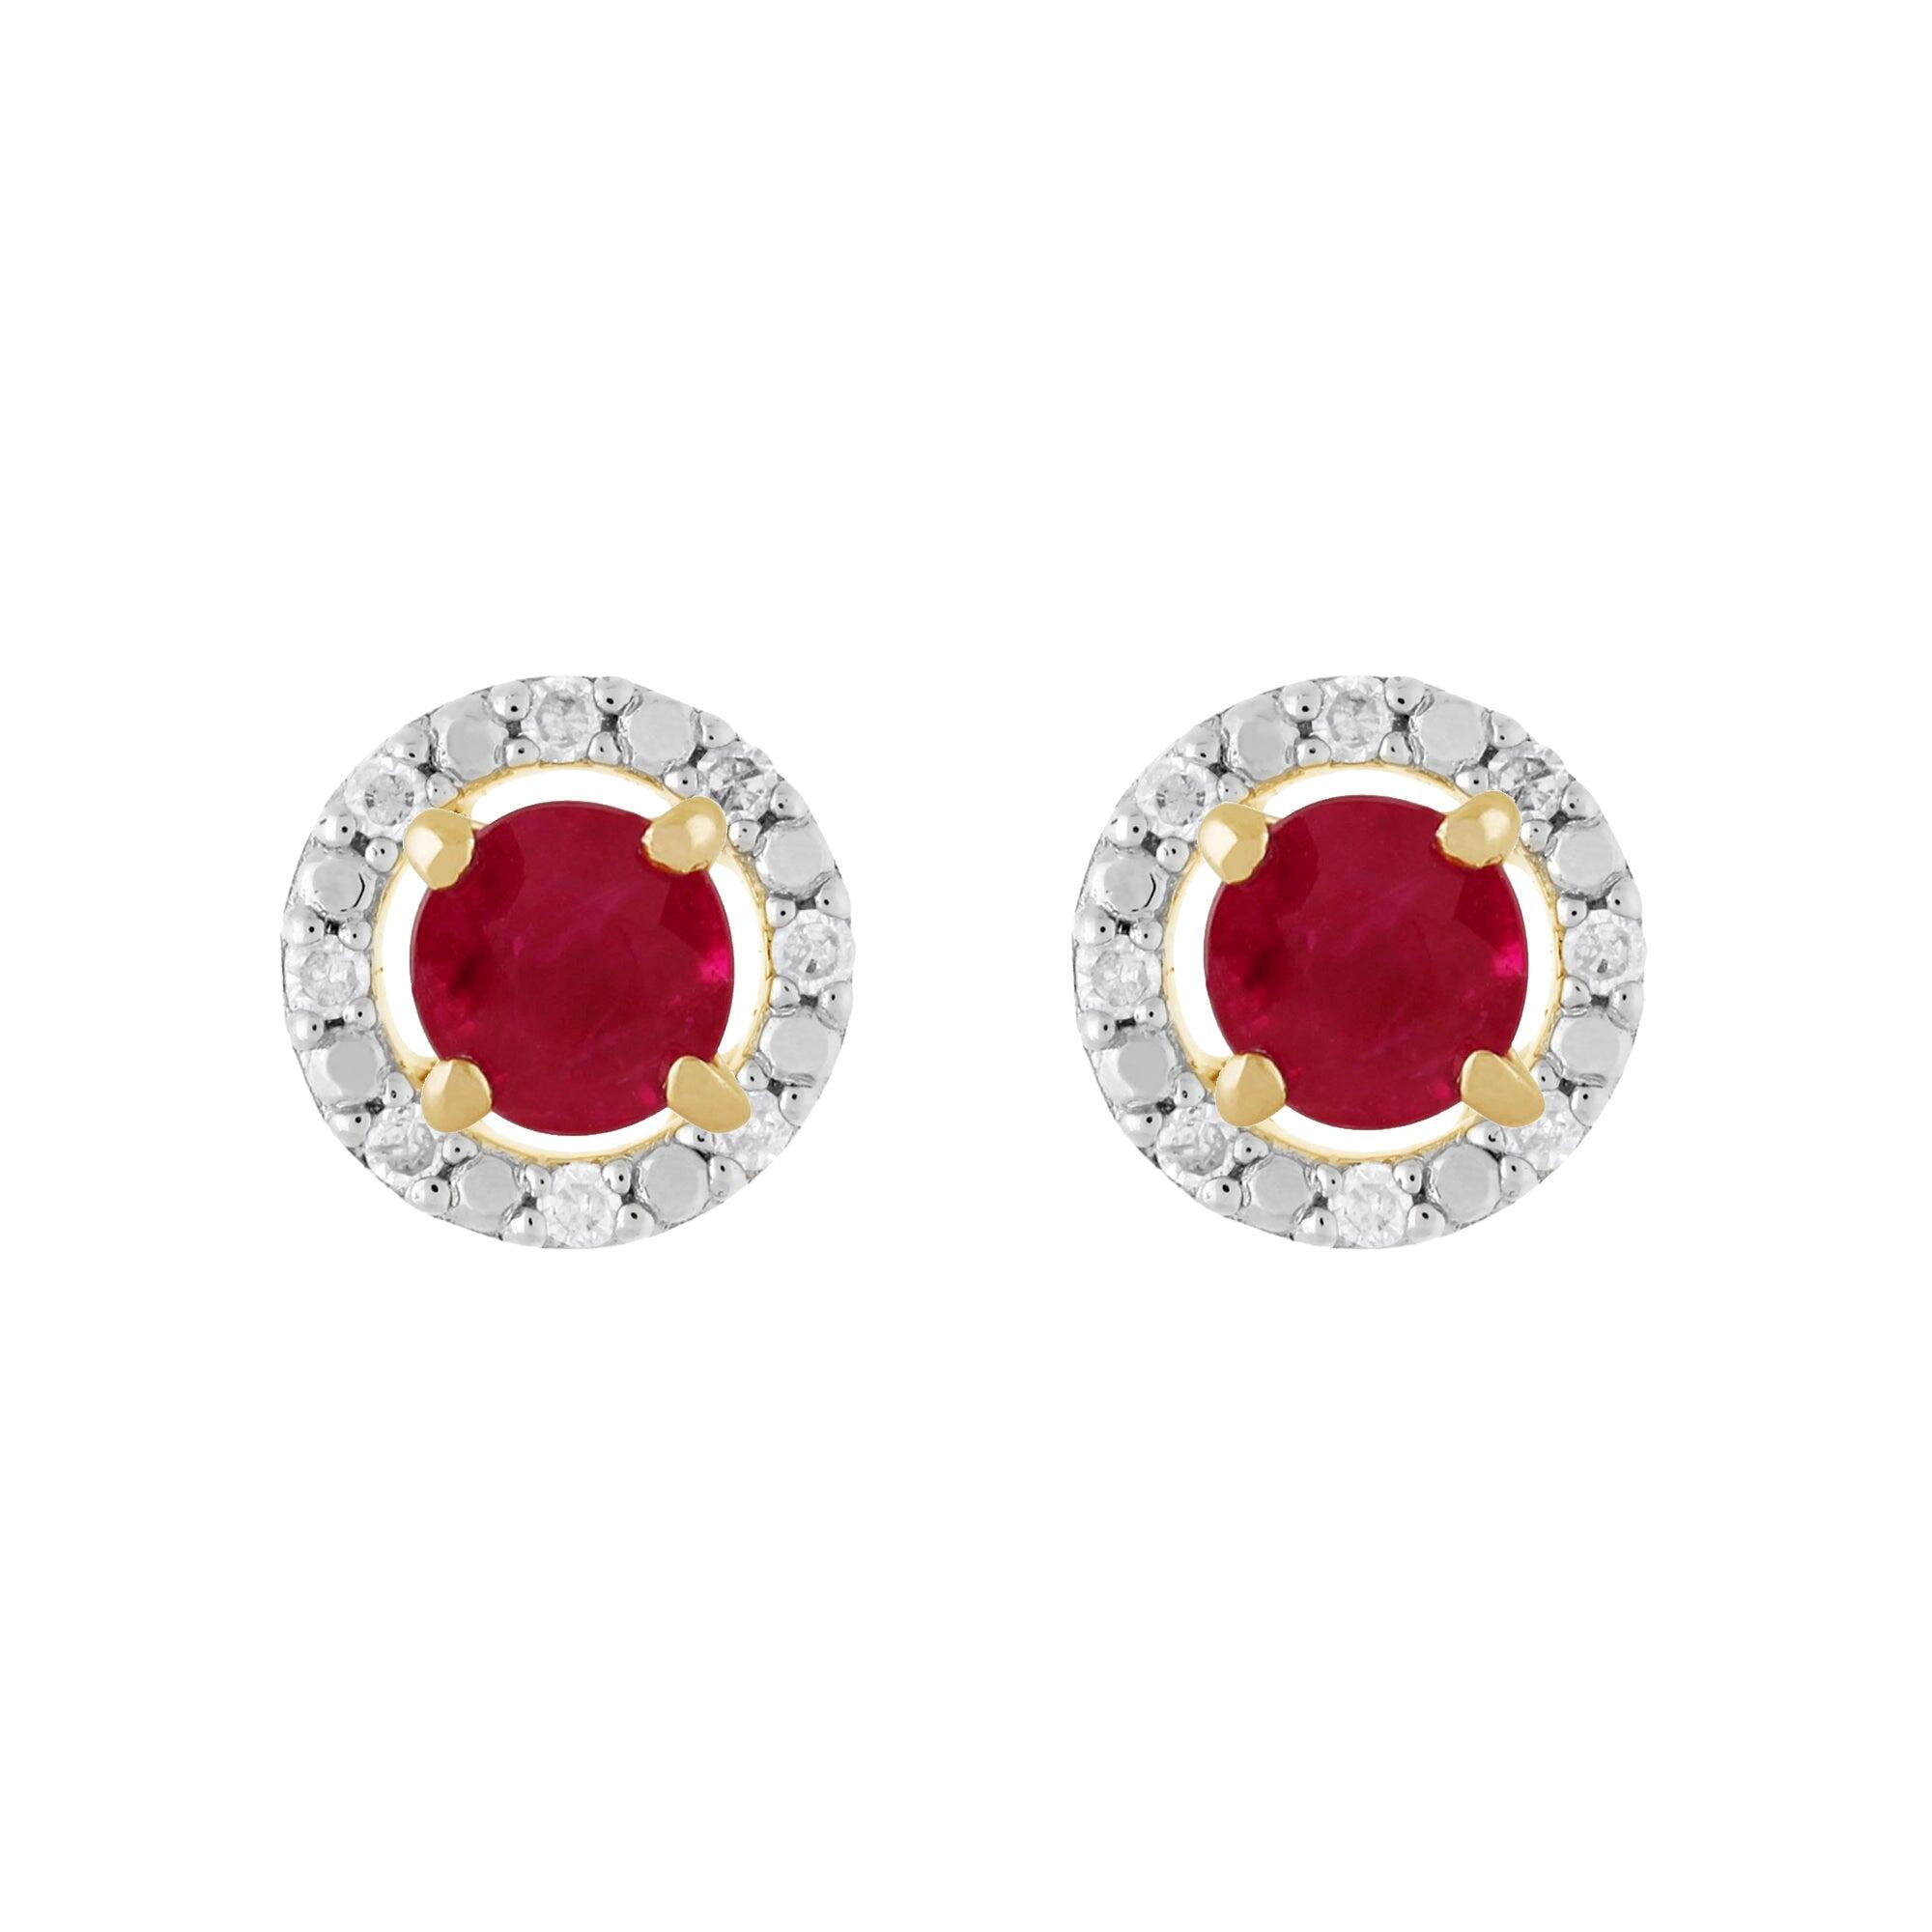 Classic Round Ruby Stud Earrings with Detachable Diamond Round Earrings Jacket Set in 9ct Yellow Gold